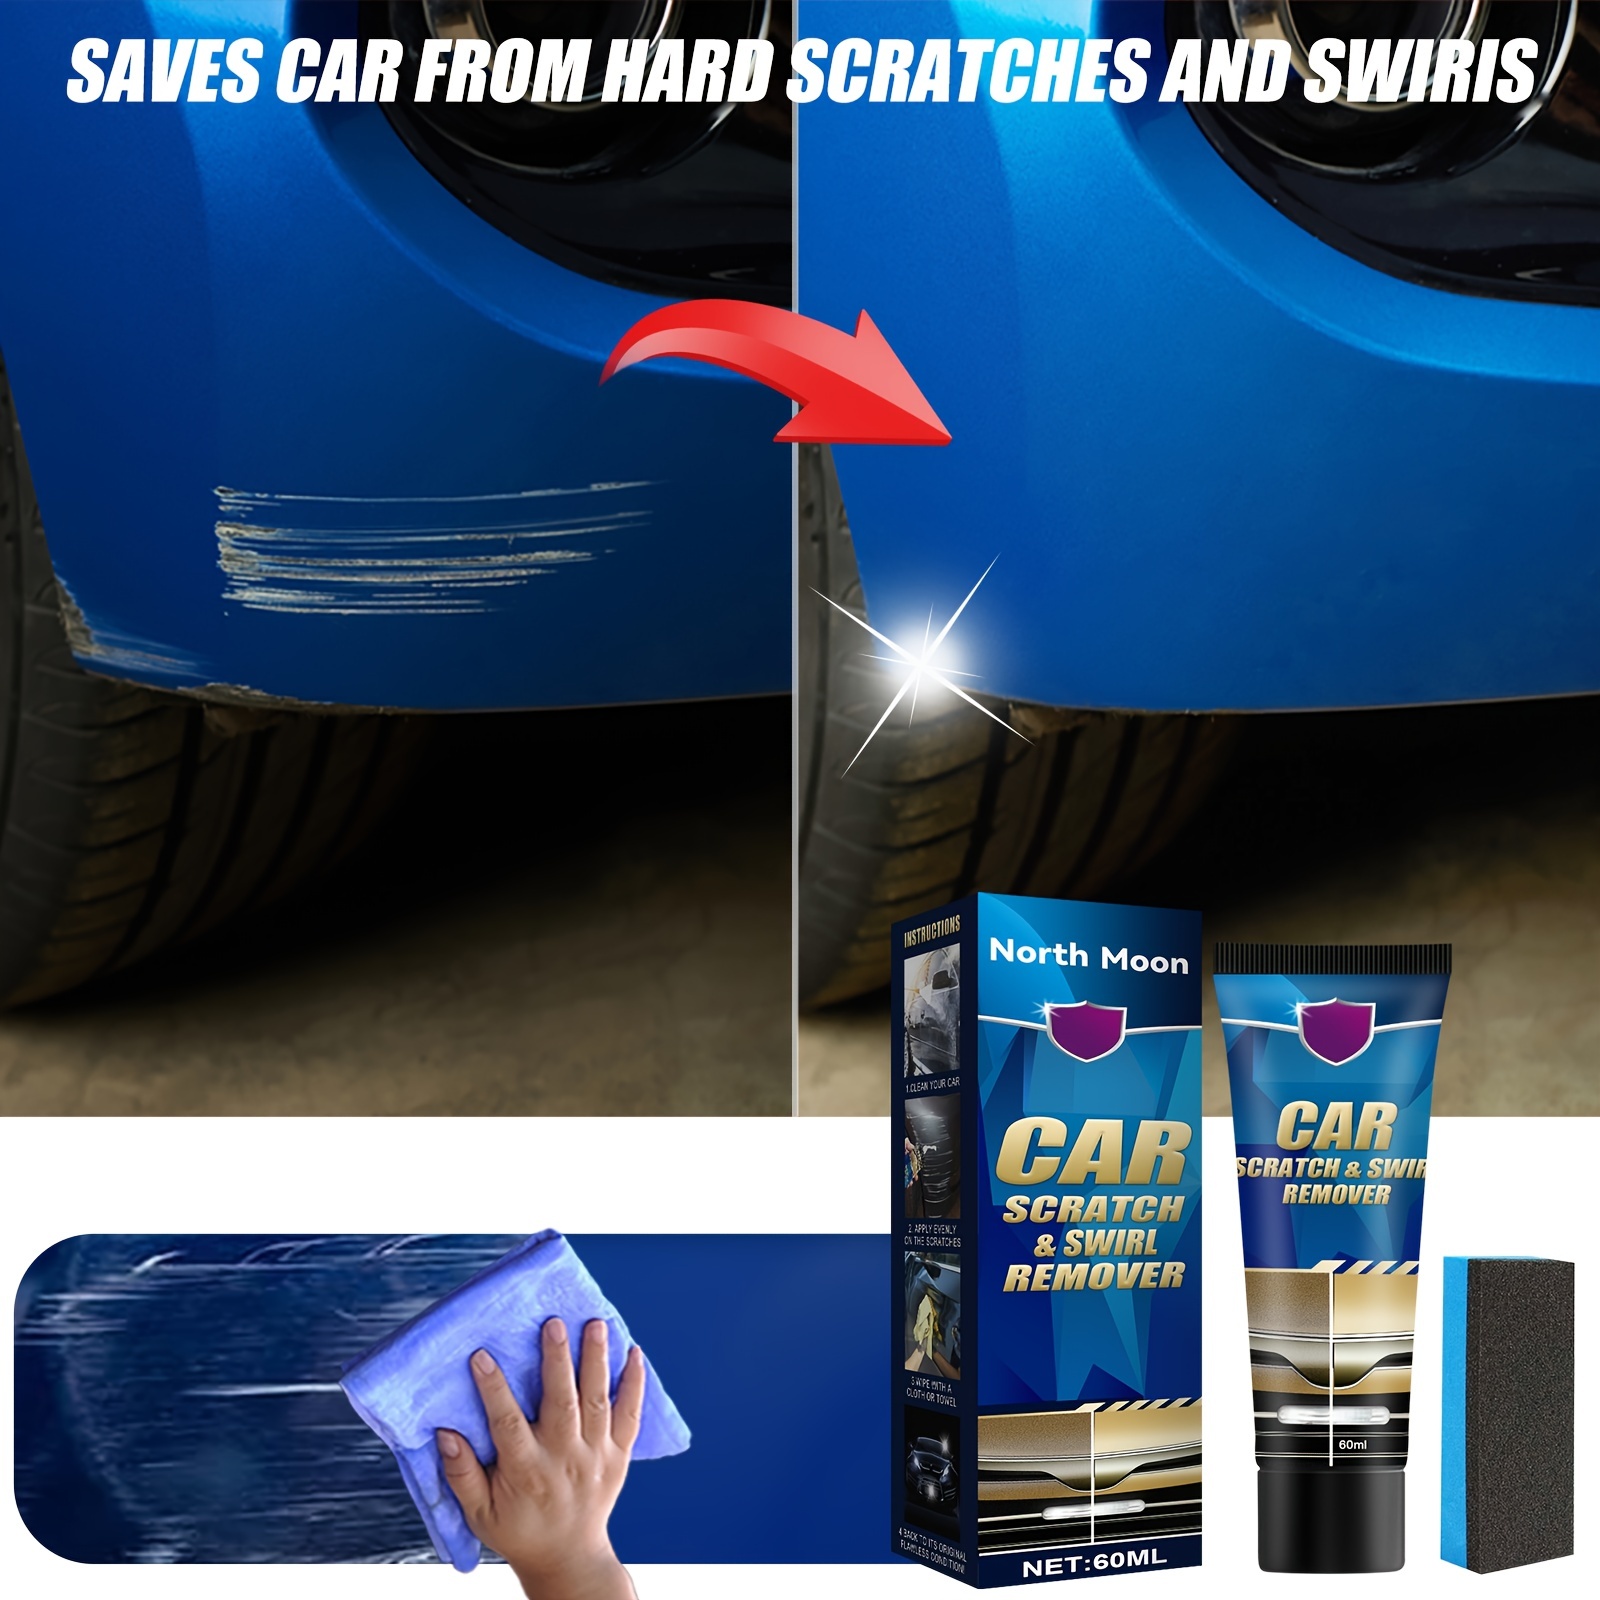 Car Scratch Repair Wax Polishing Auto Styling Wax Scratch Repair Polishing  Kit Body Compound Polishing Cleaner For Vehicles - AliExpress